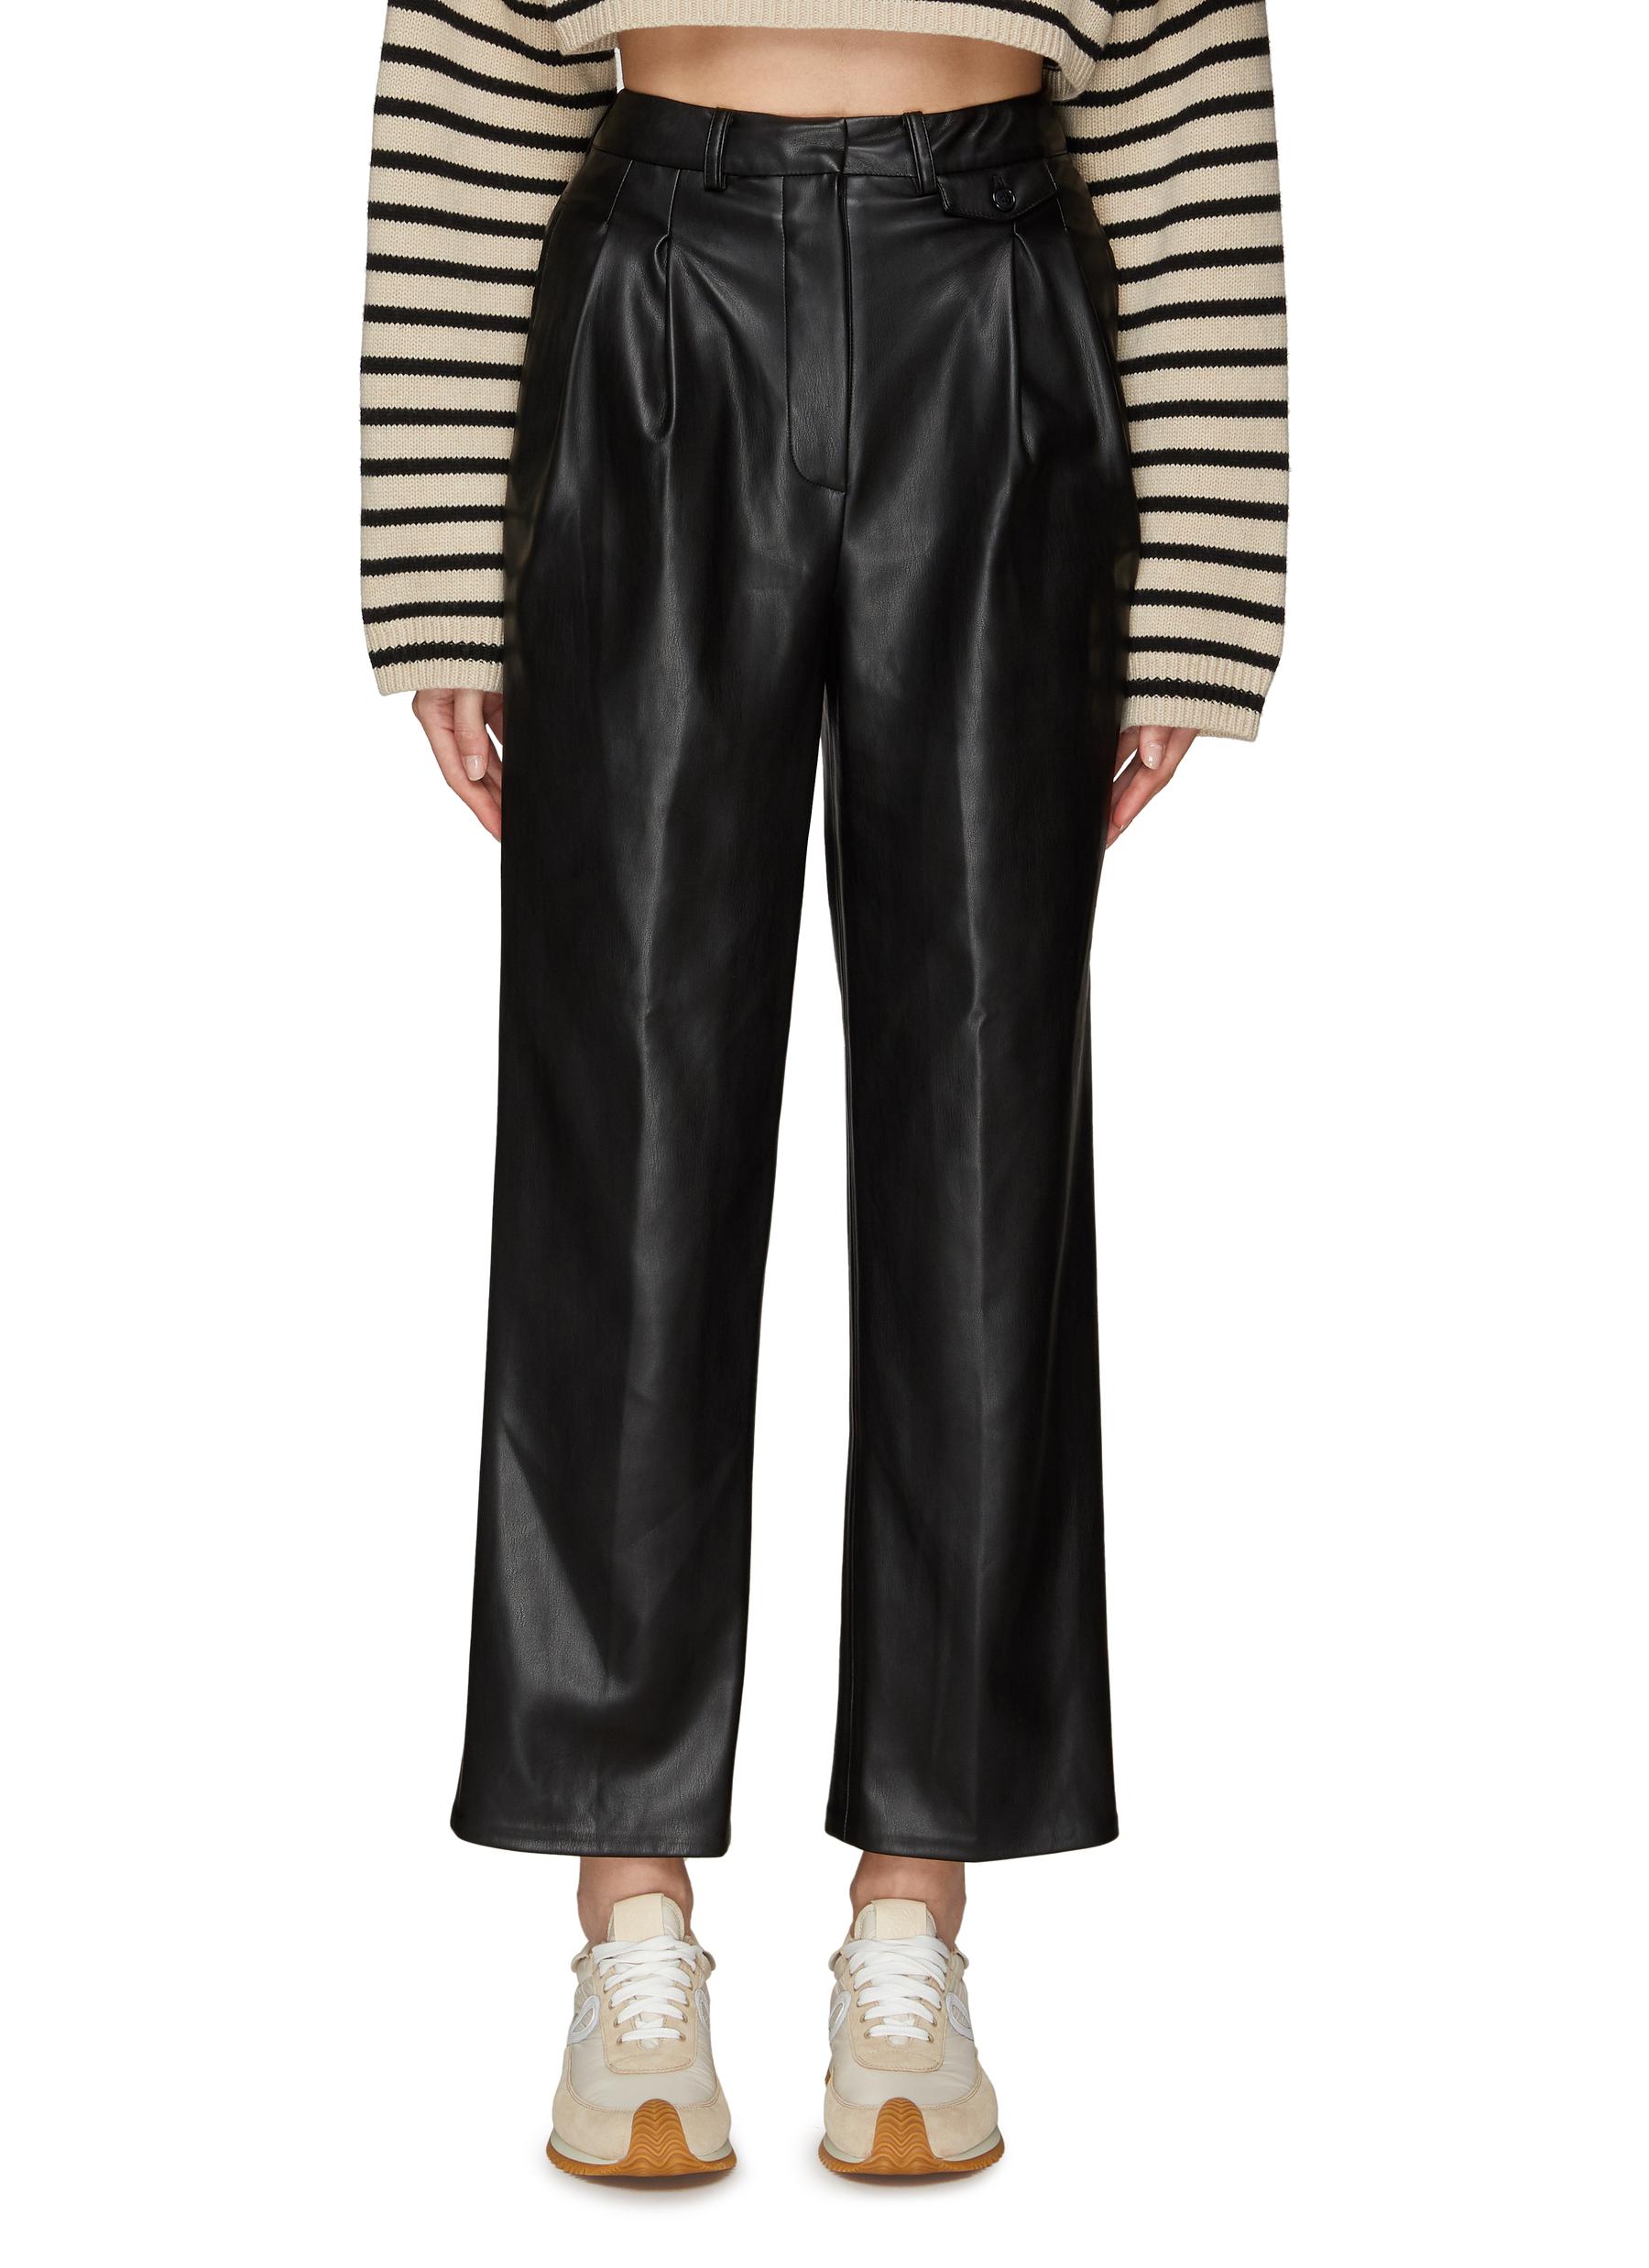 THE FRANKIE SHOP ‘PERNILLE' FAUX LEATHER PANTS